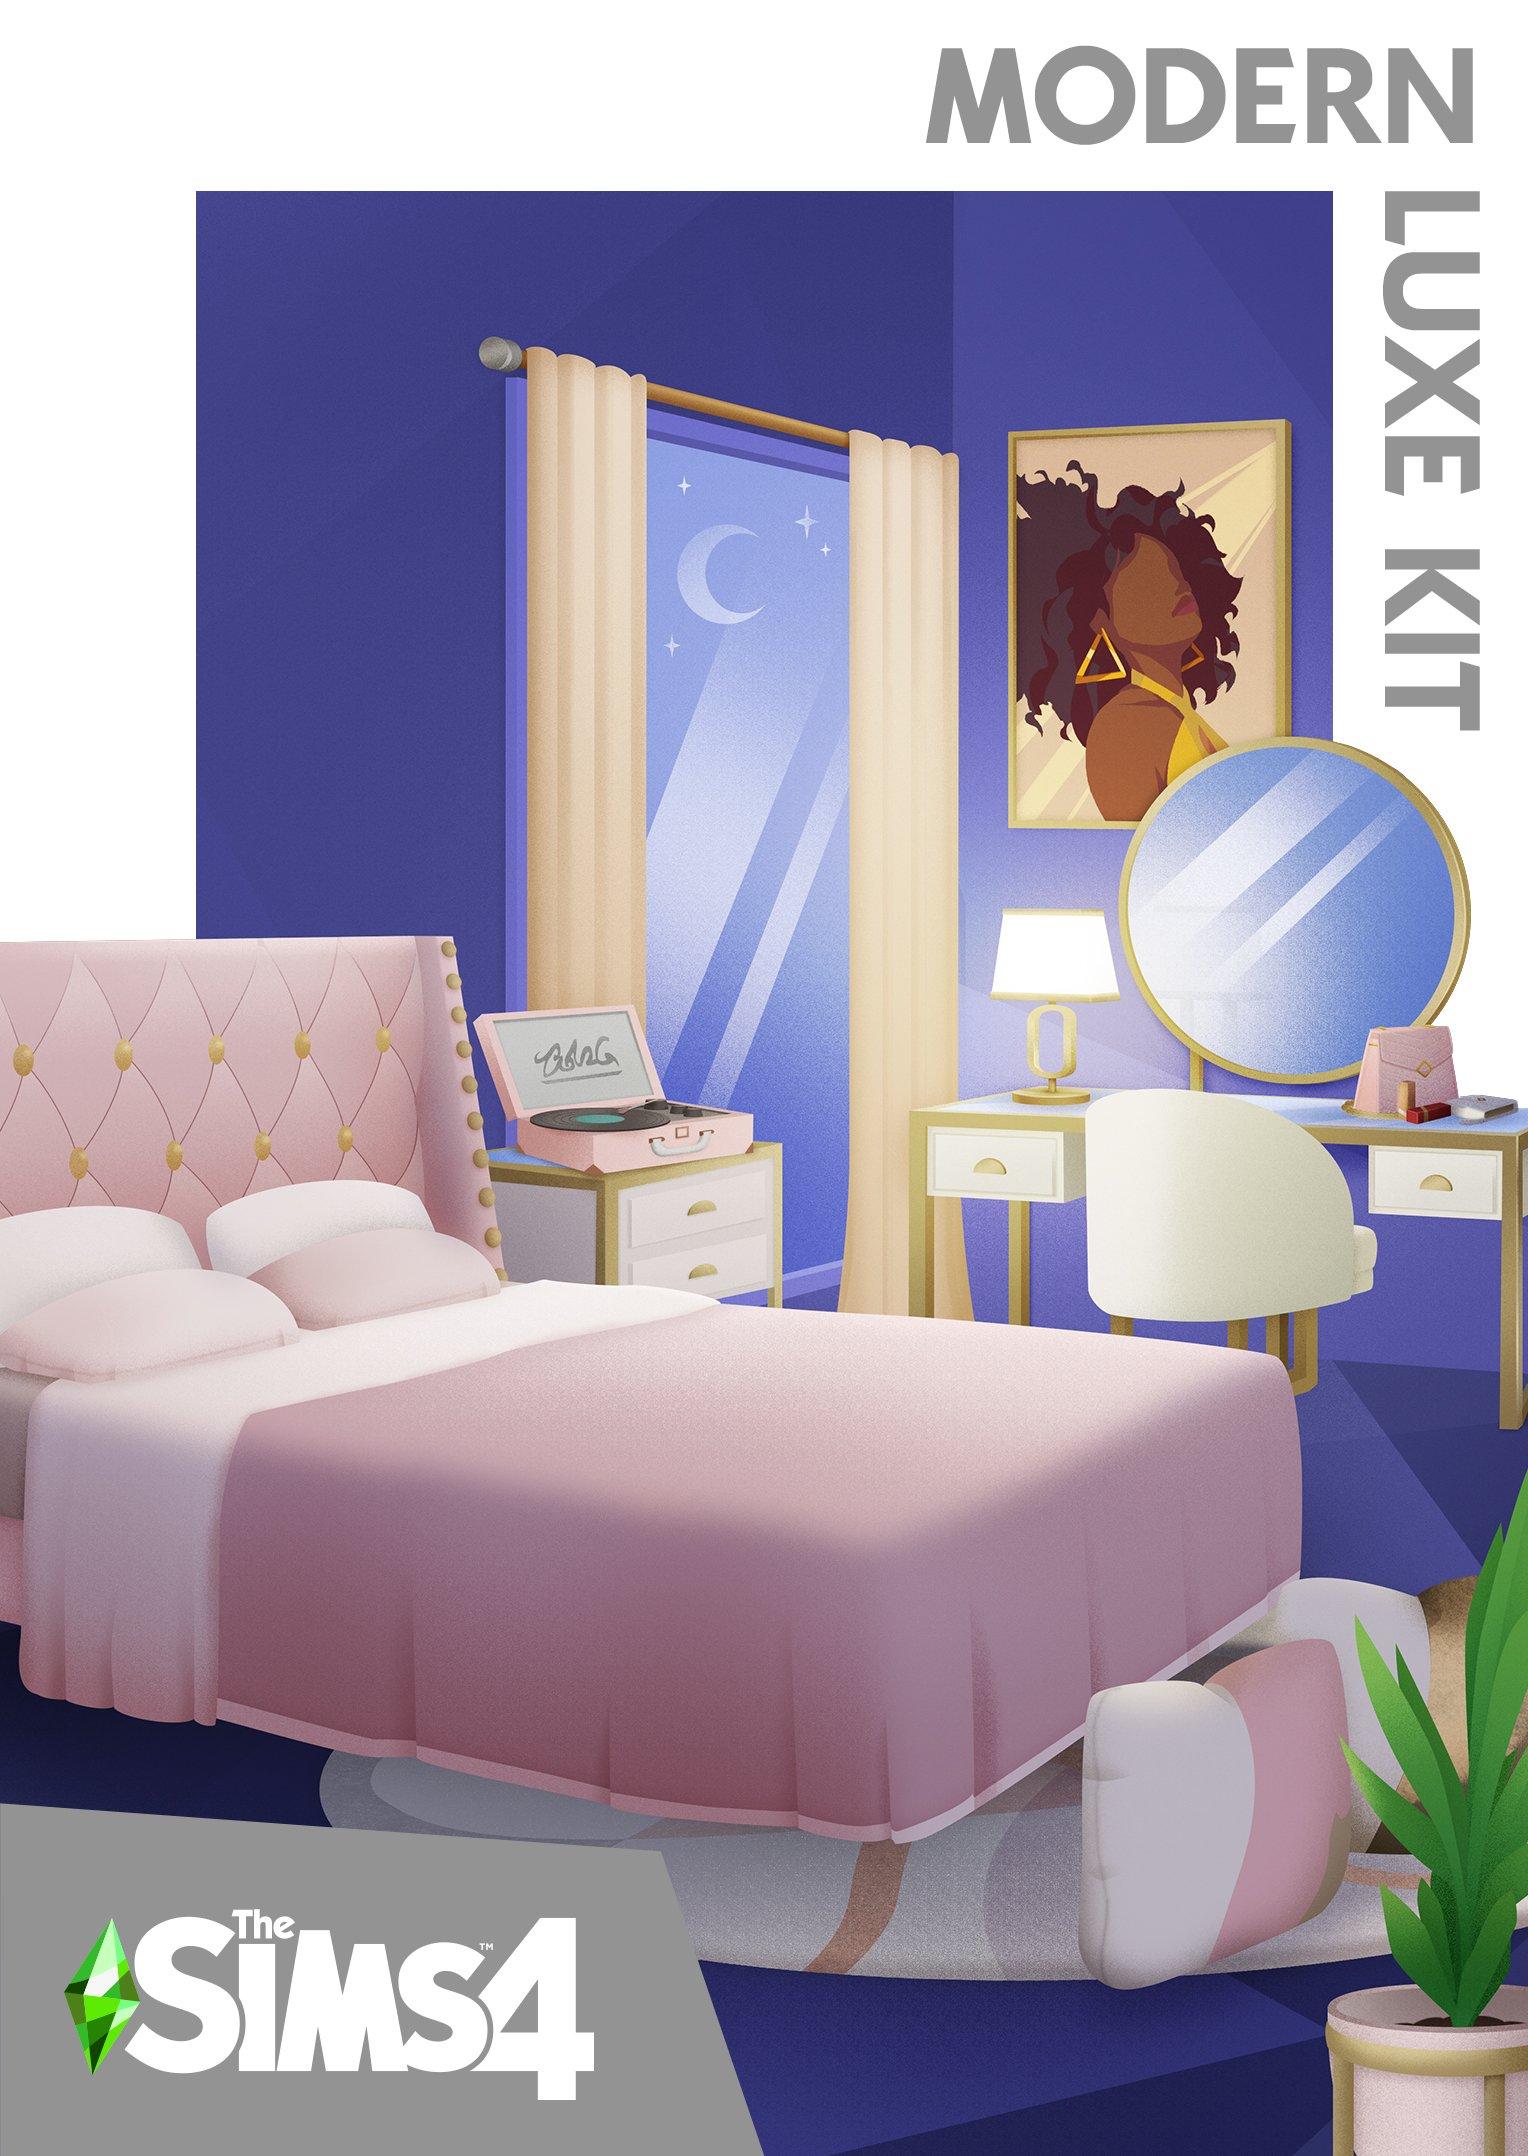 The Sims 4 Modern Luxe Kit: A Luxurious Overview!